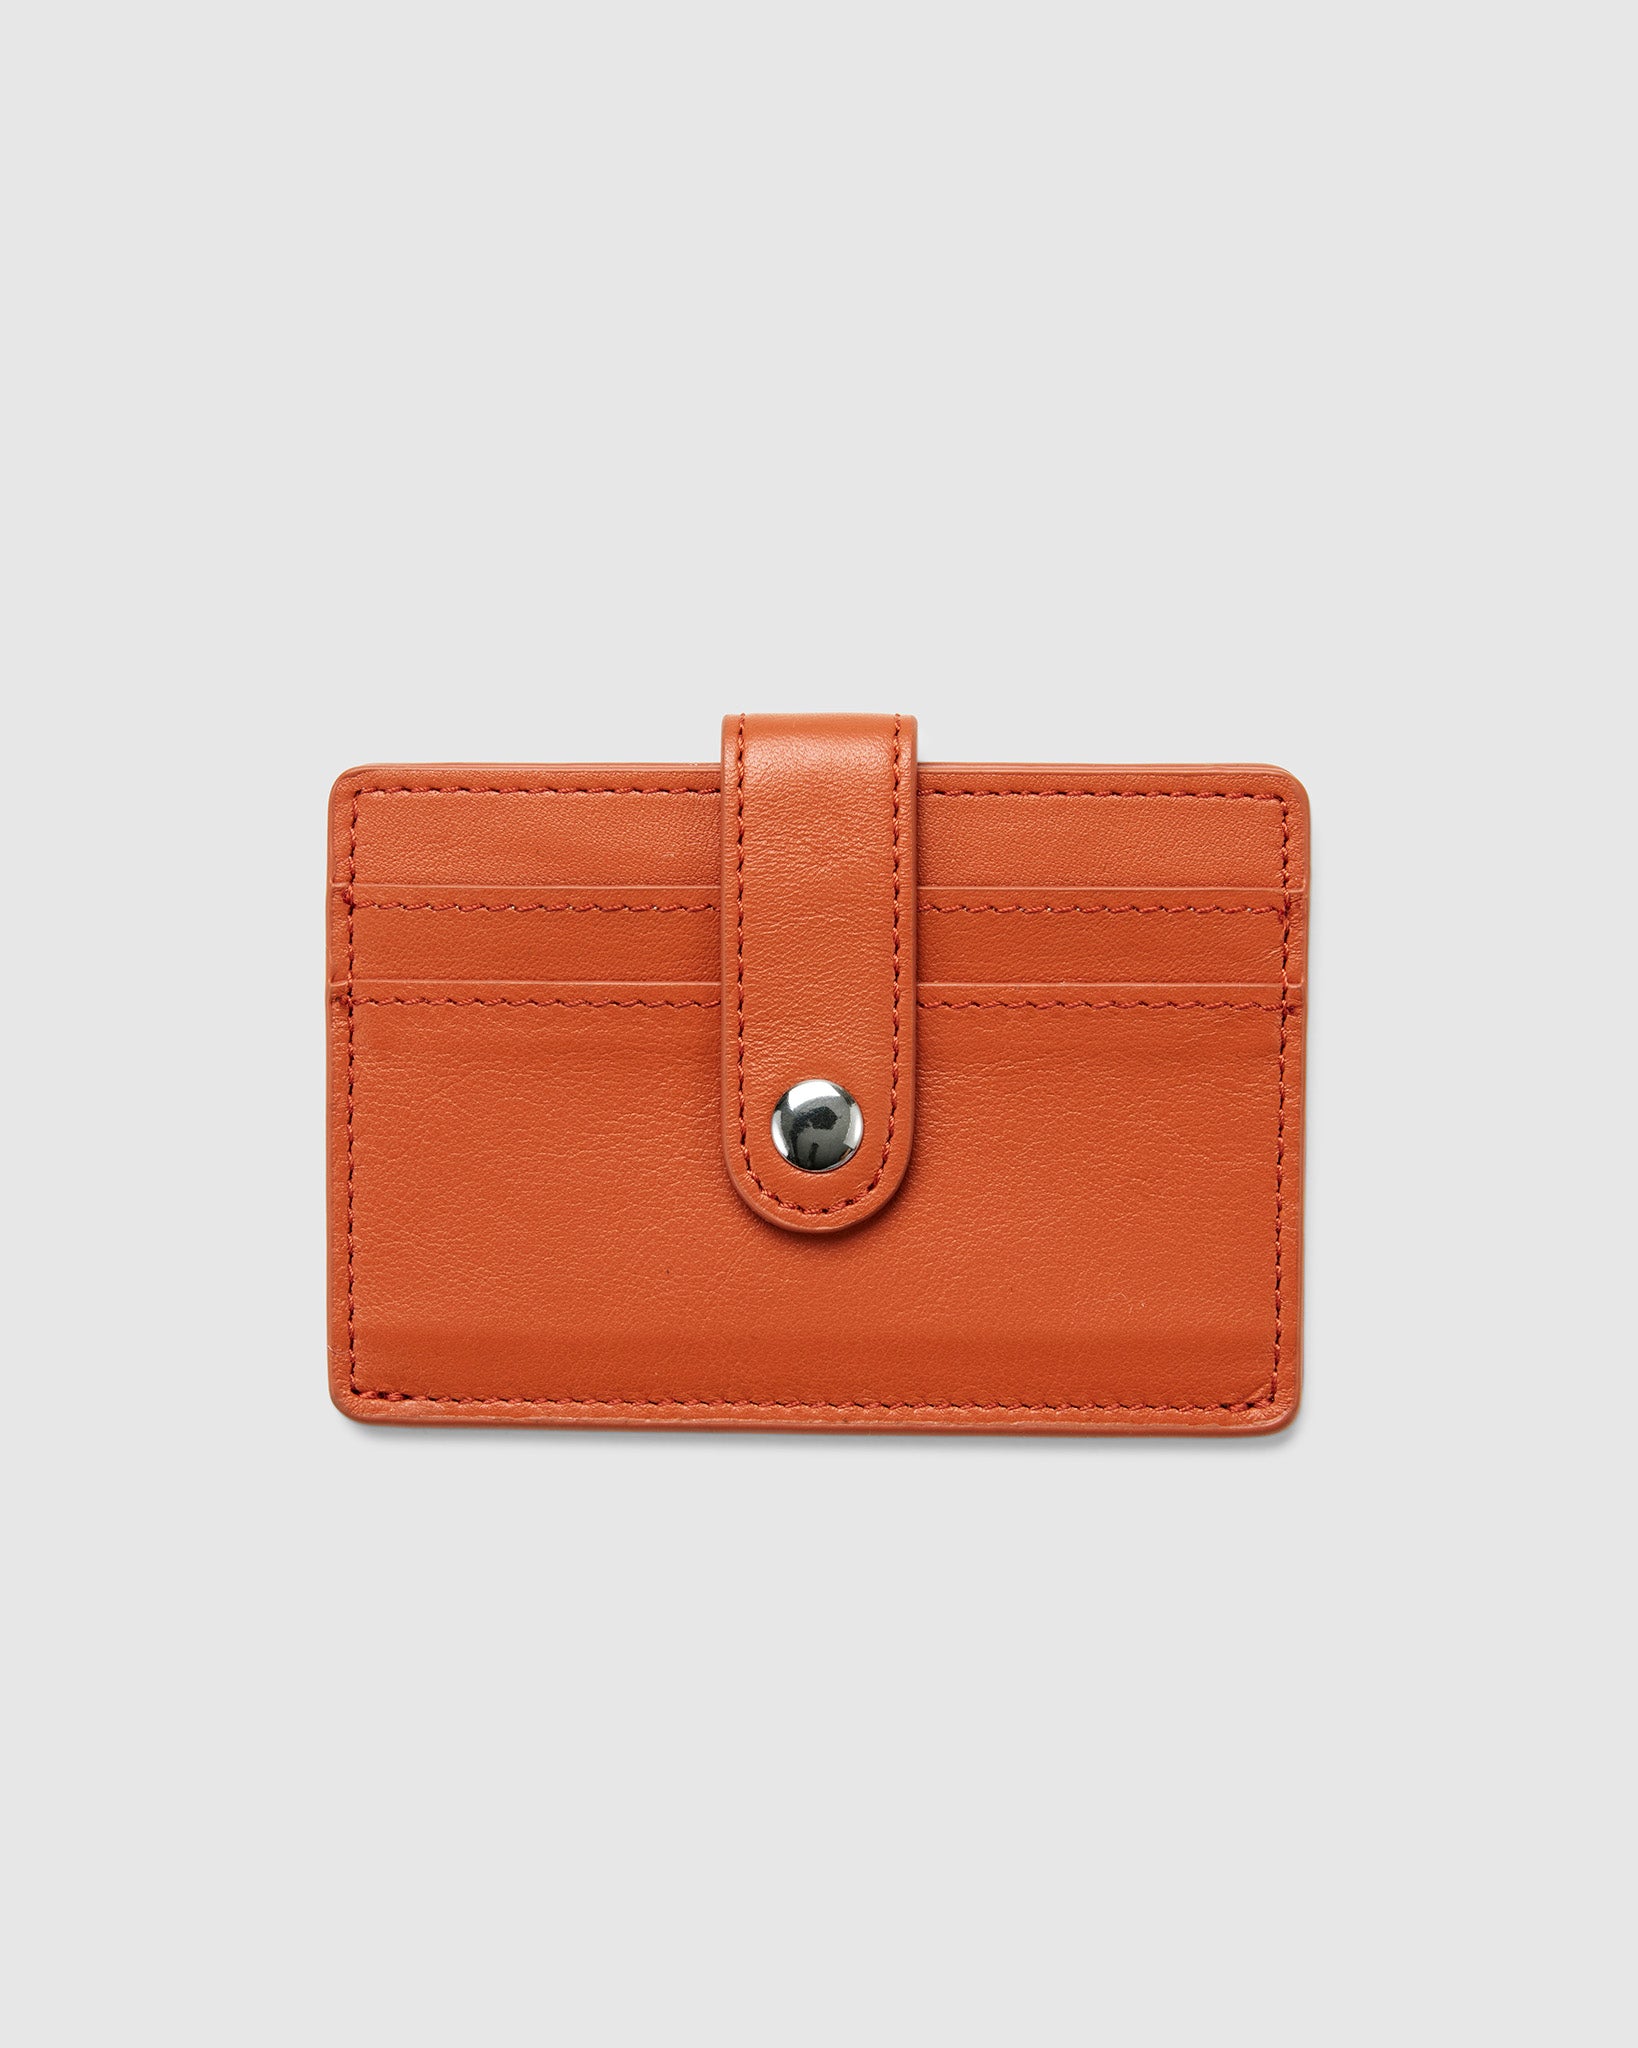 Leather RFID Credit Card Holder in Squash